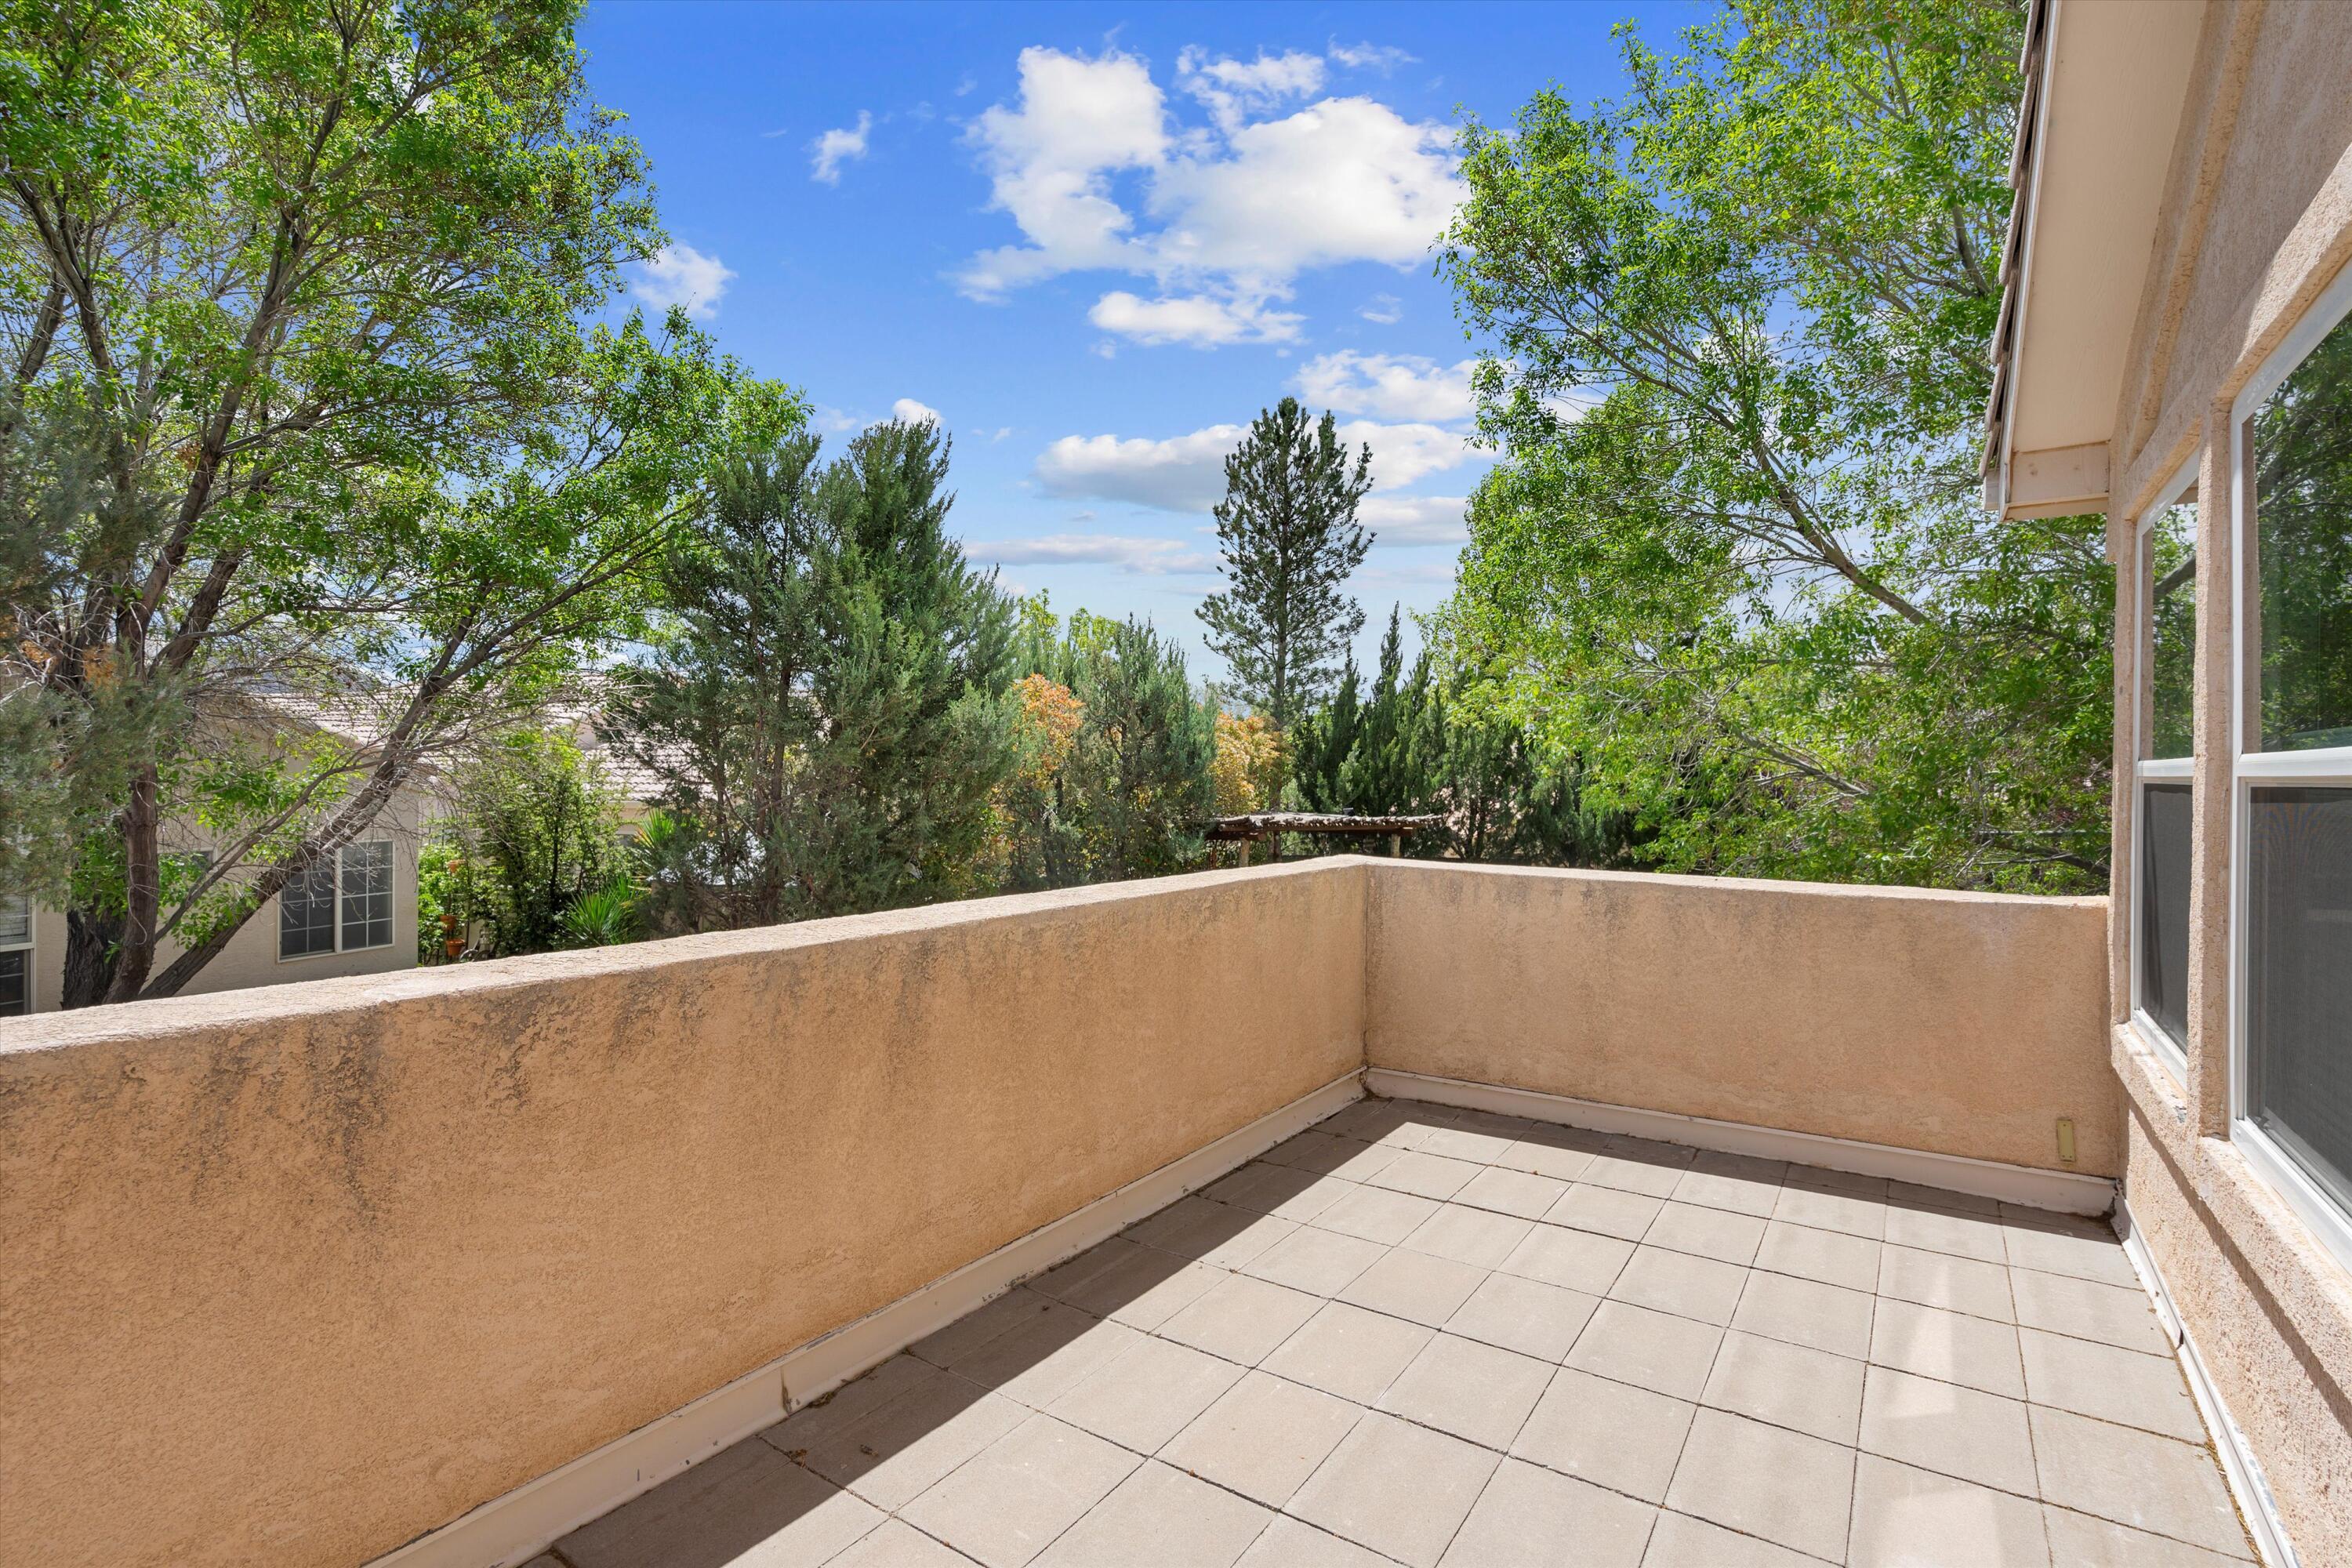 10824 Wasatch Road SE, Albuquerque, New Mexico 87123, 4 Bedrooms Bedrooms, ,3 BathroomsBathrooms,Residential,For Sale,10824 Wasatch Road SE,1061069